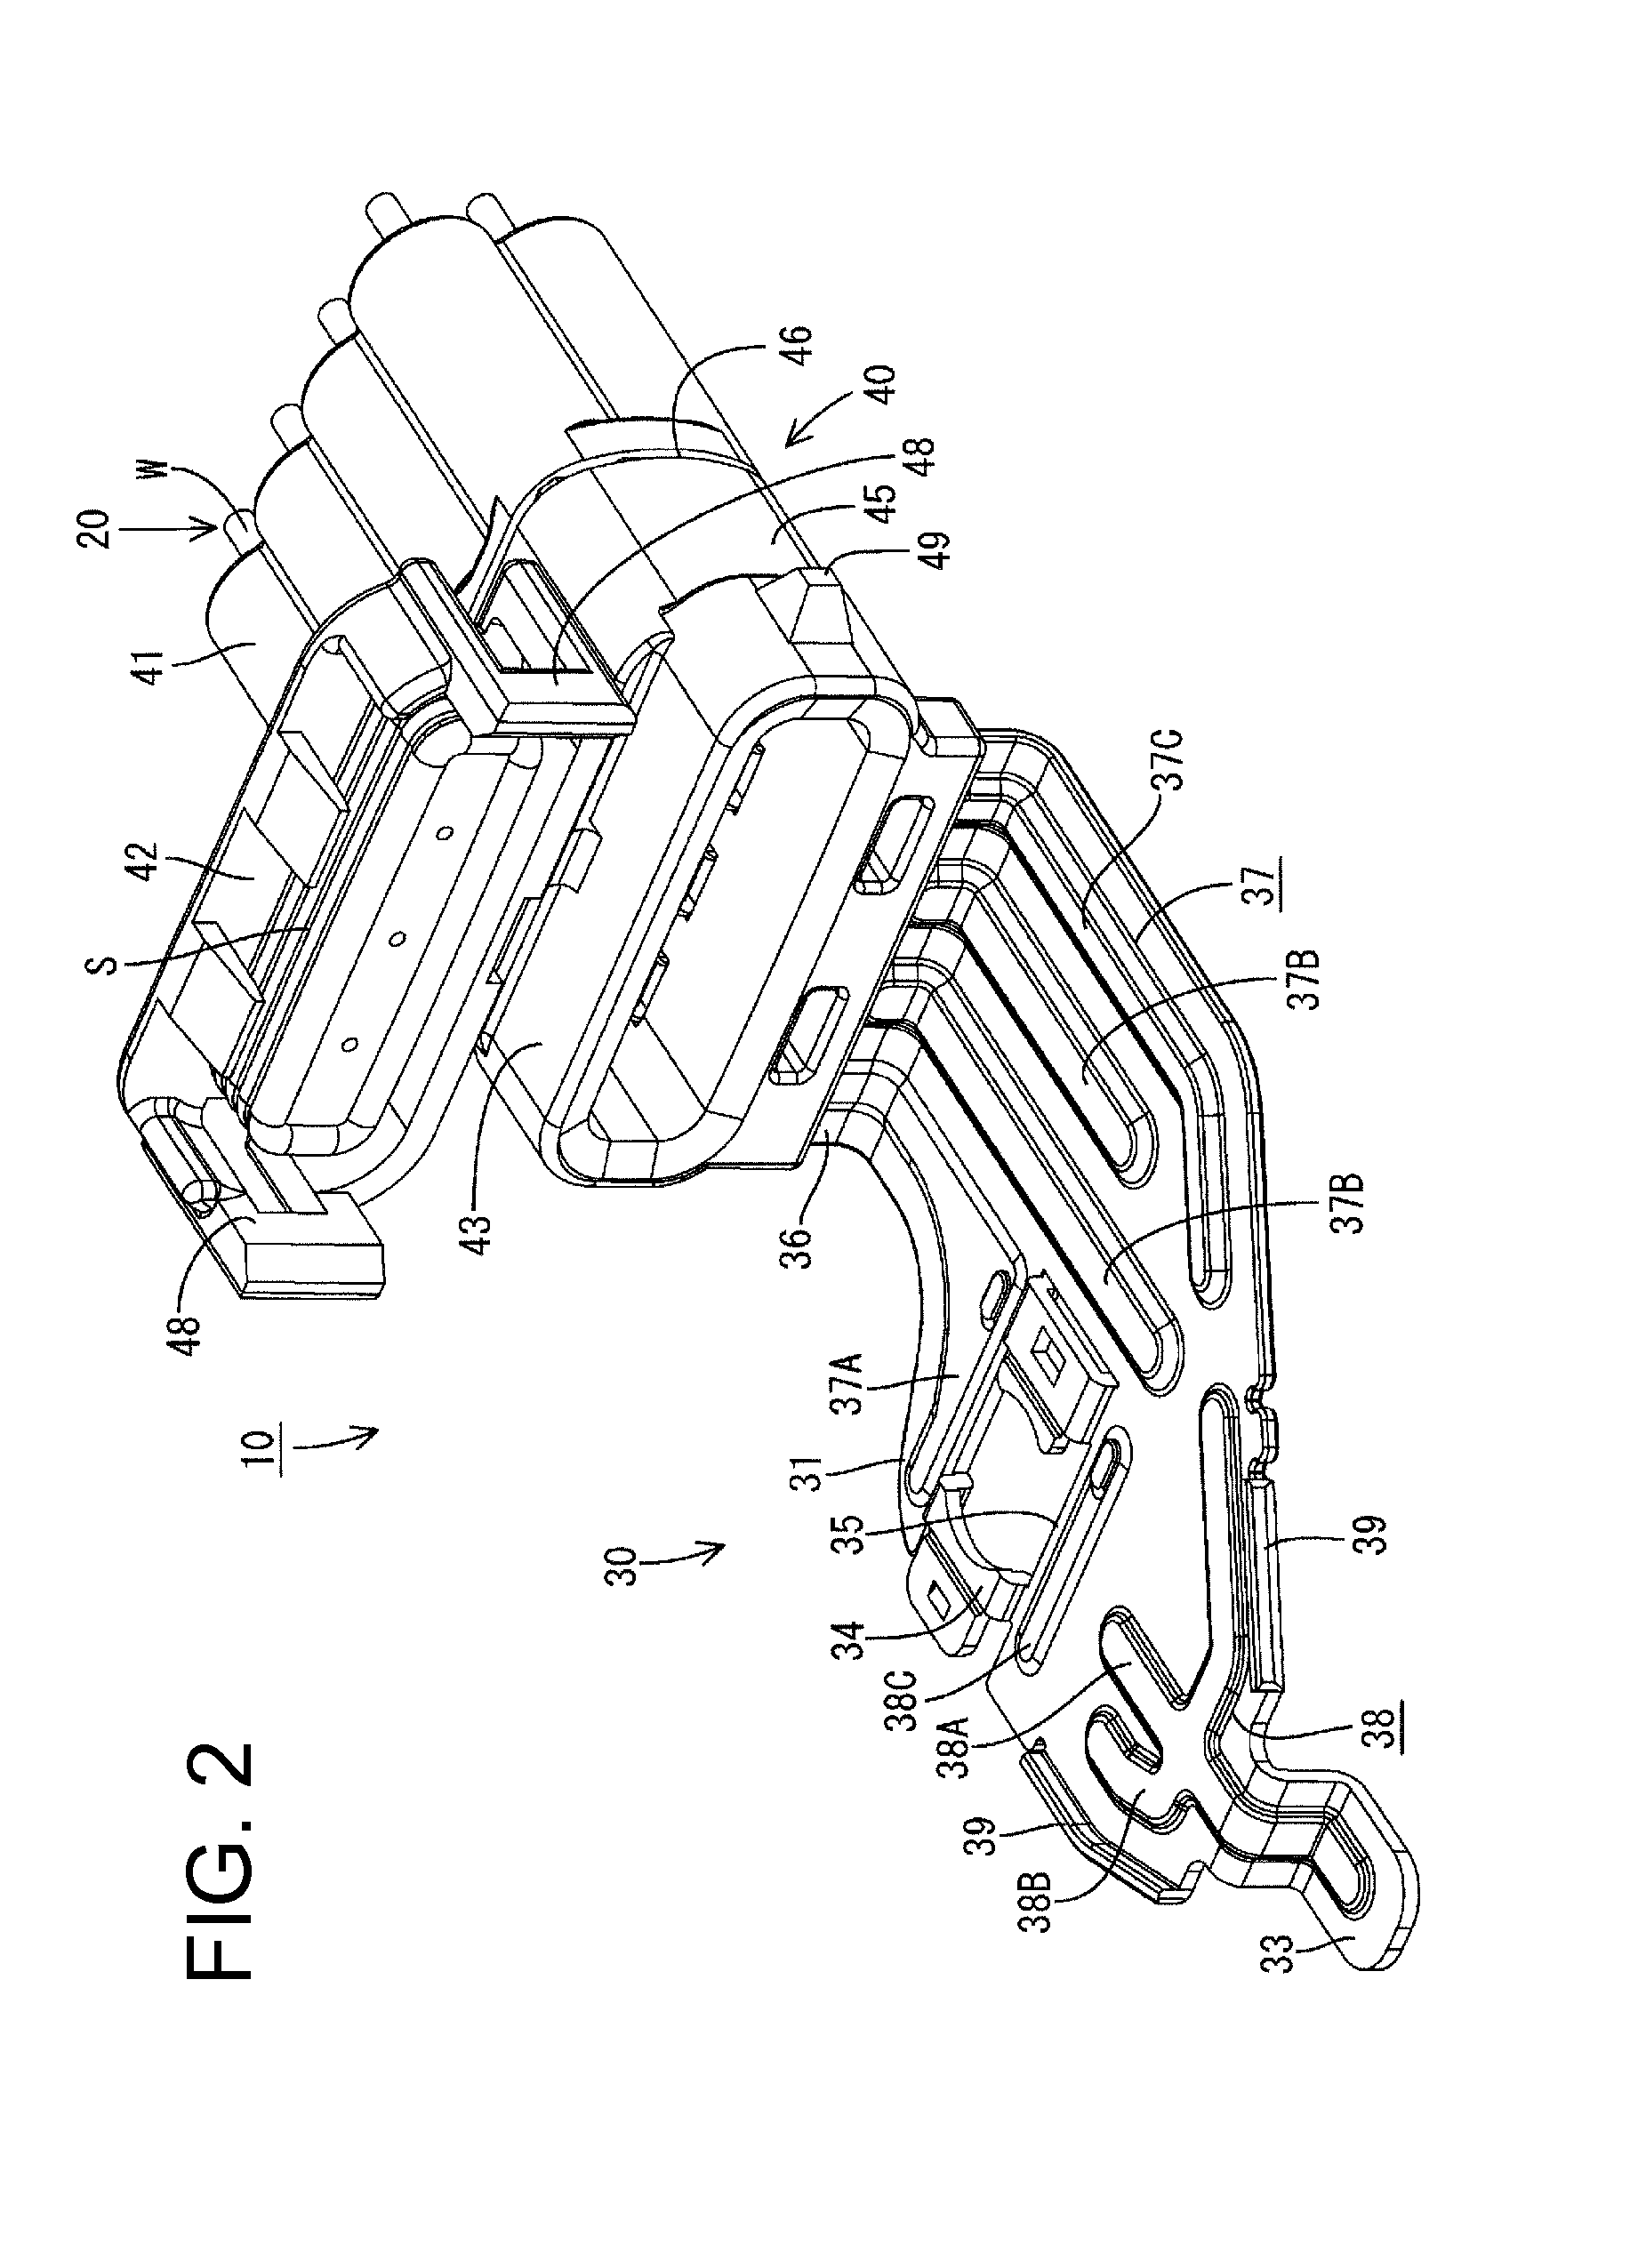 Conductive plate and joint connector